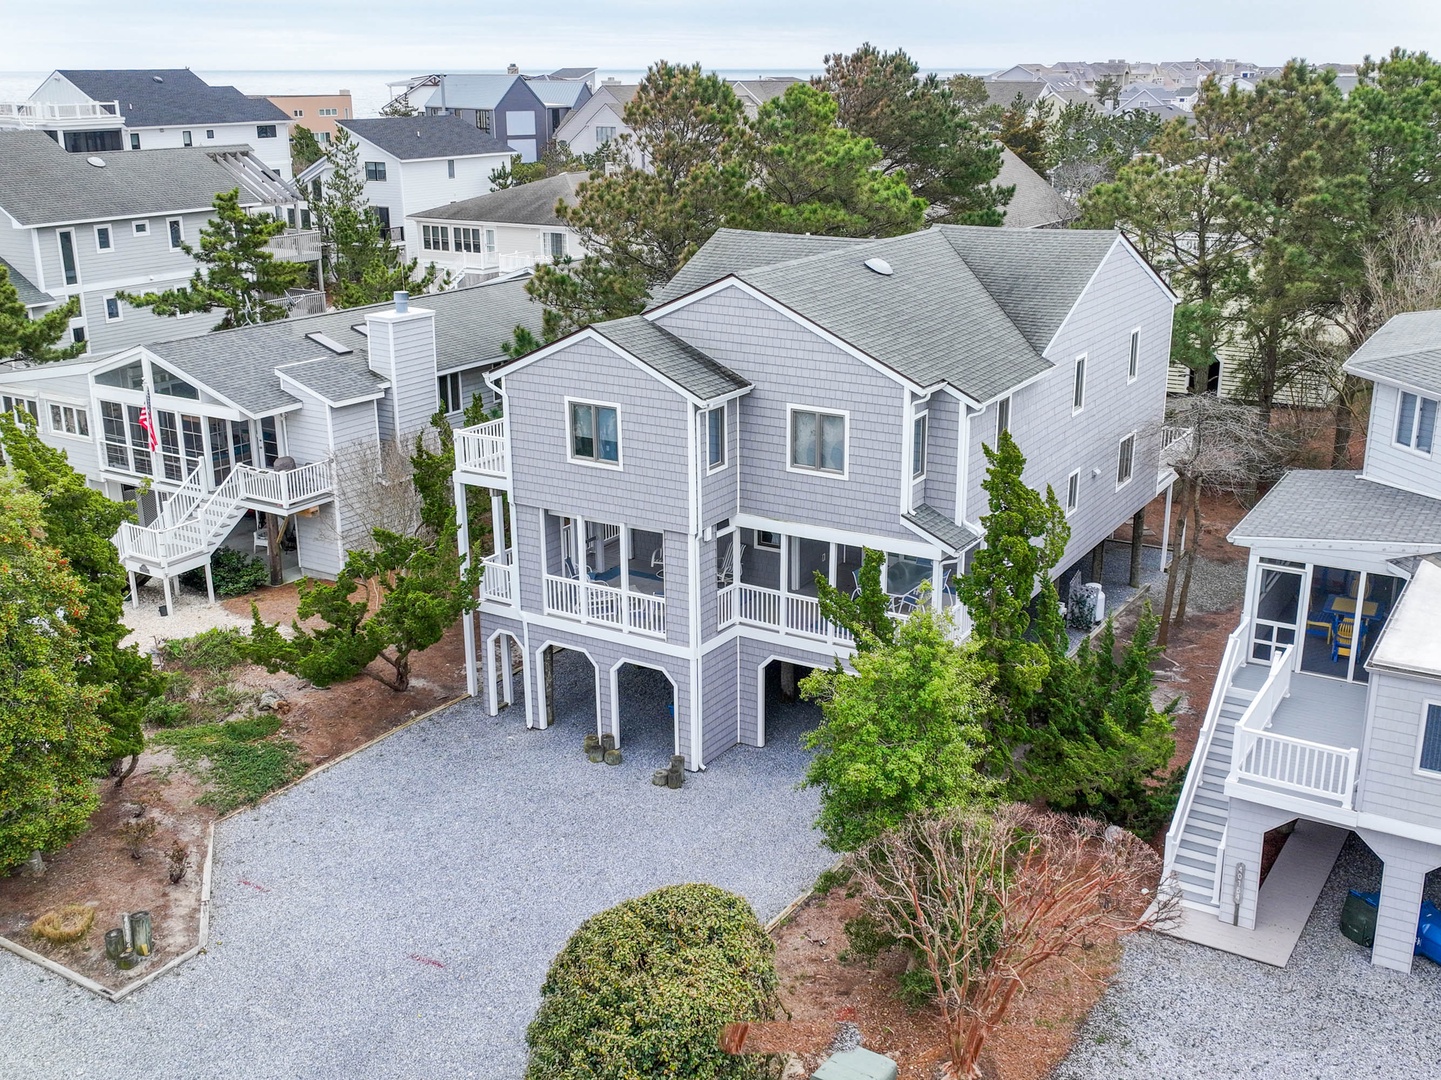 Plentiful parking is available in front of this stunning Bethany Beach home